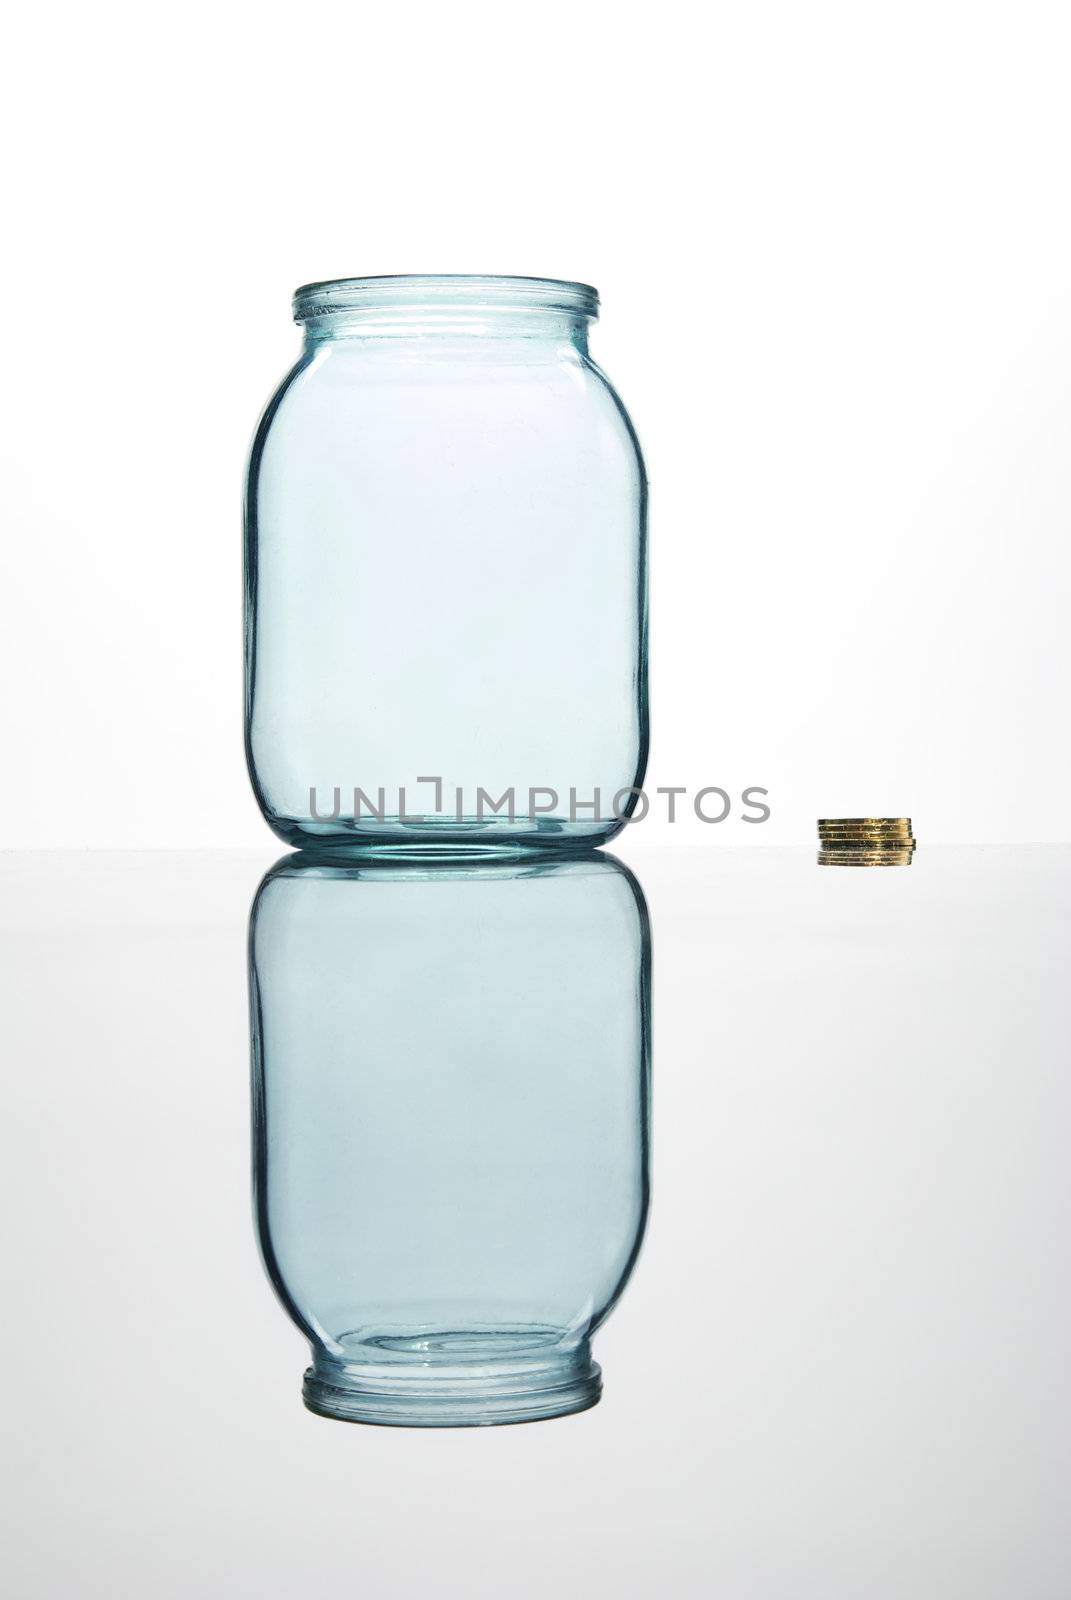 Coins and empty glass jar on white background